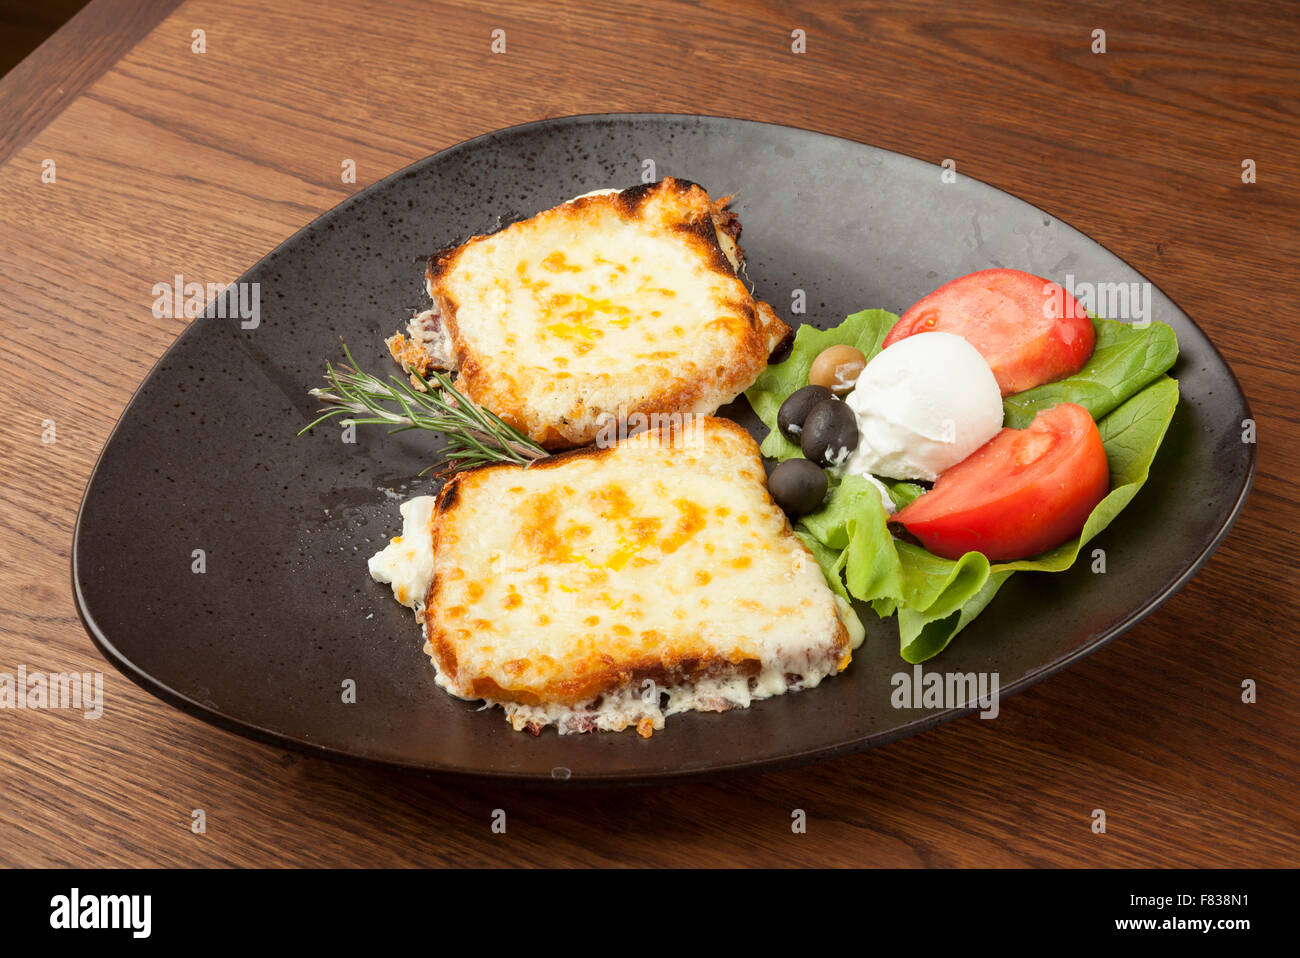 fried mozzarella with grilled vegetables on wooden table Stock Photo